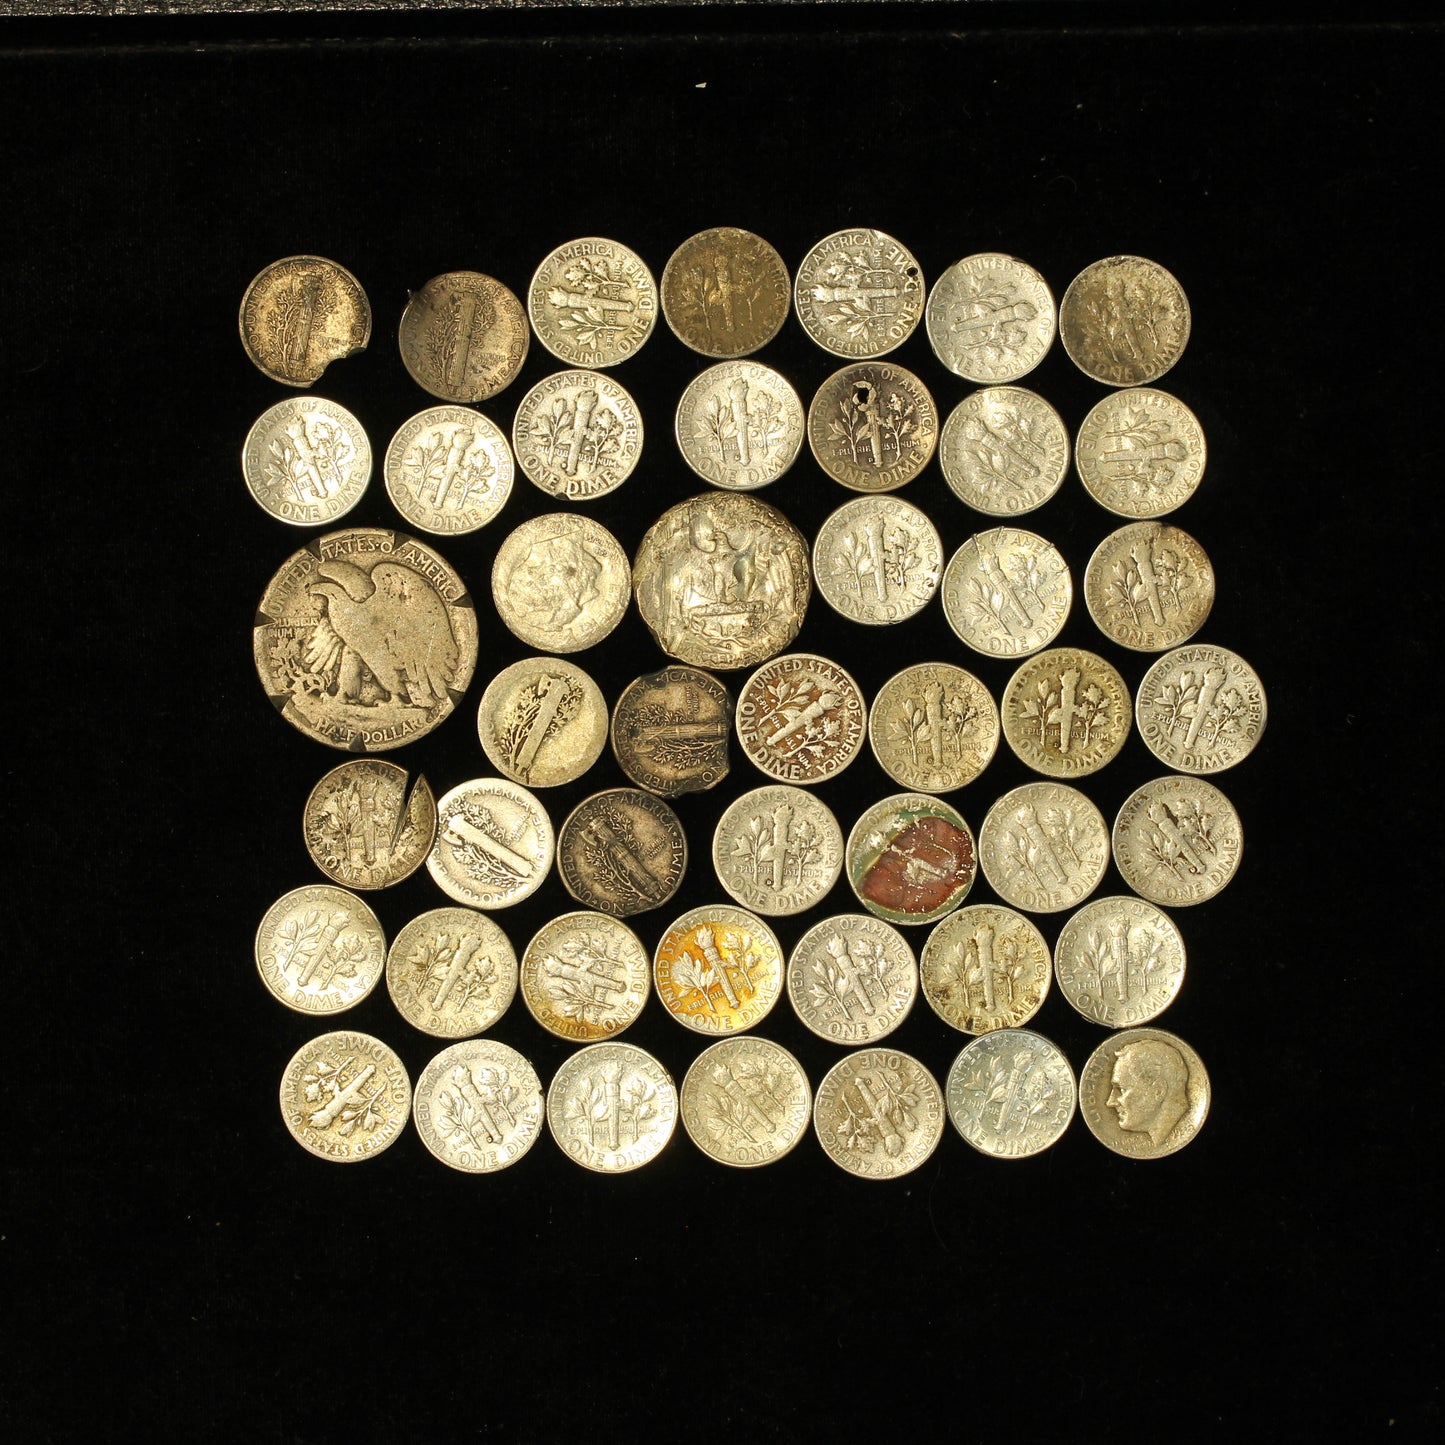 90% US Silver Coin Lot - Damaged / Worn / Cull Coins 127.9 grams